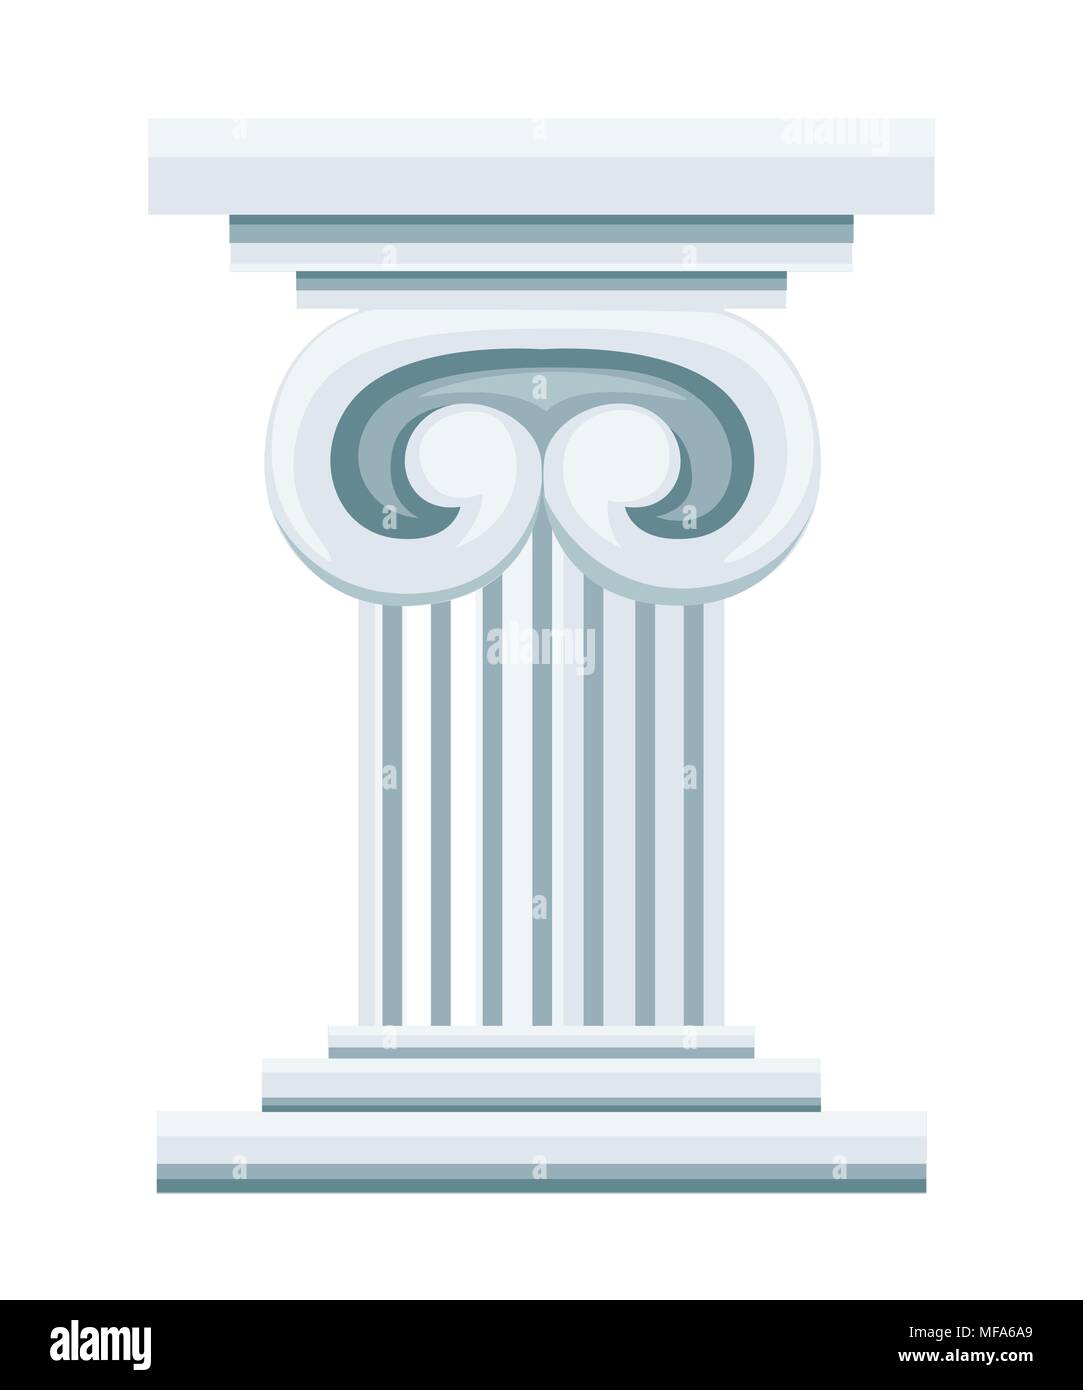 Roman column pedestal or pillar. Flat style design. Vector illustration isolated on white background. Web site page and mobile app. Stock Vector